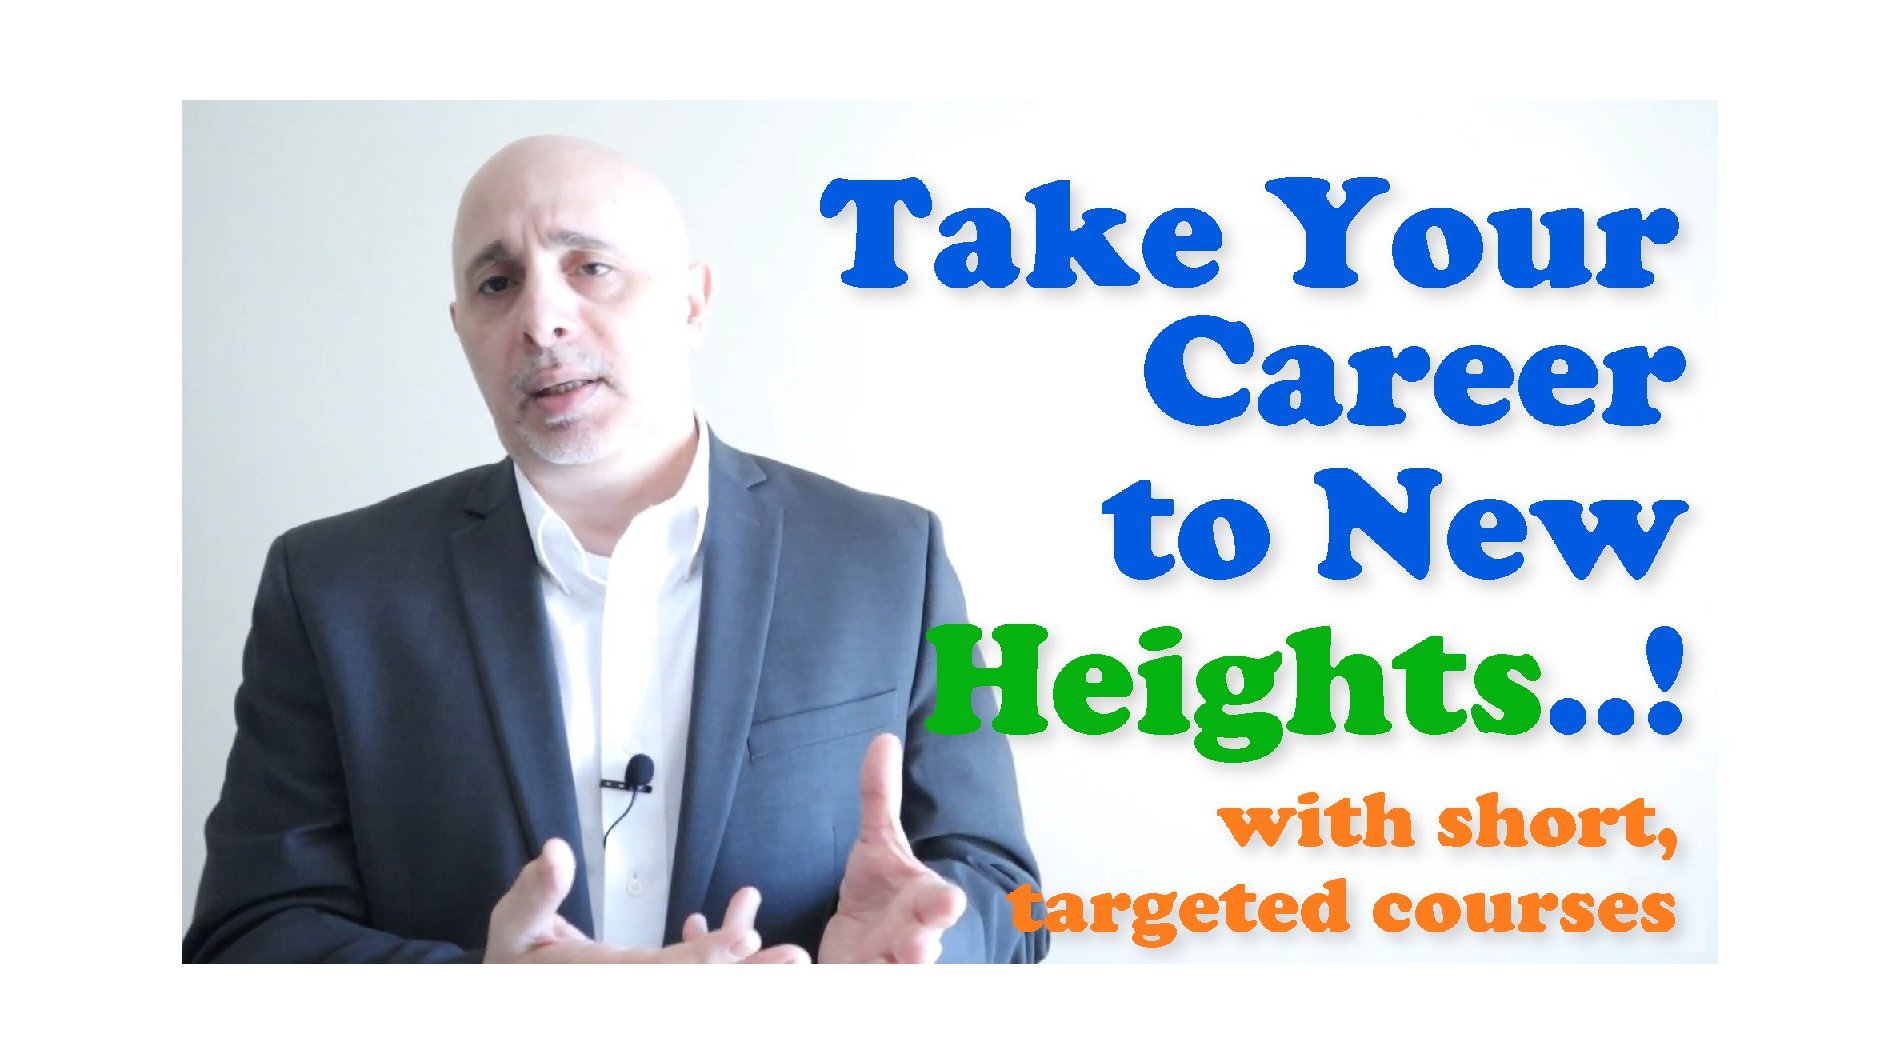 Elevate your career with targeted short courses